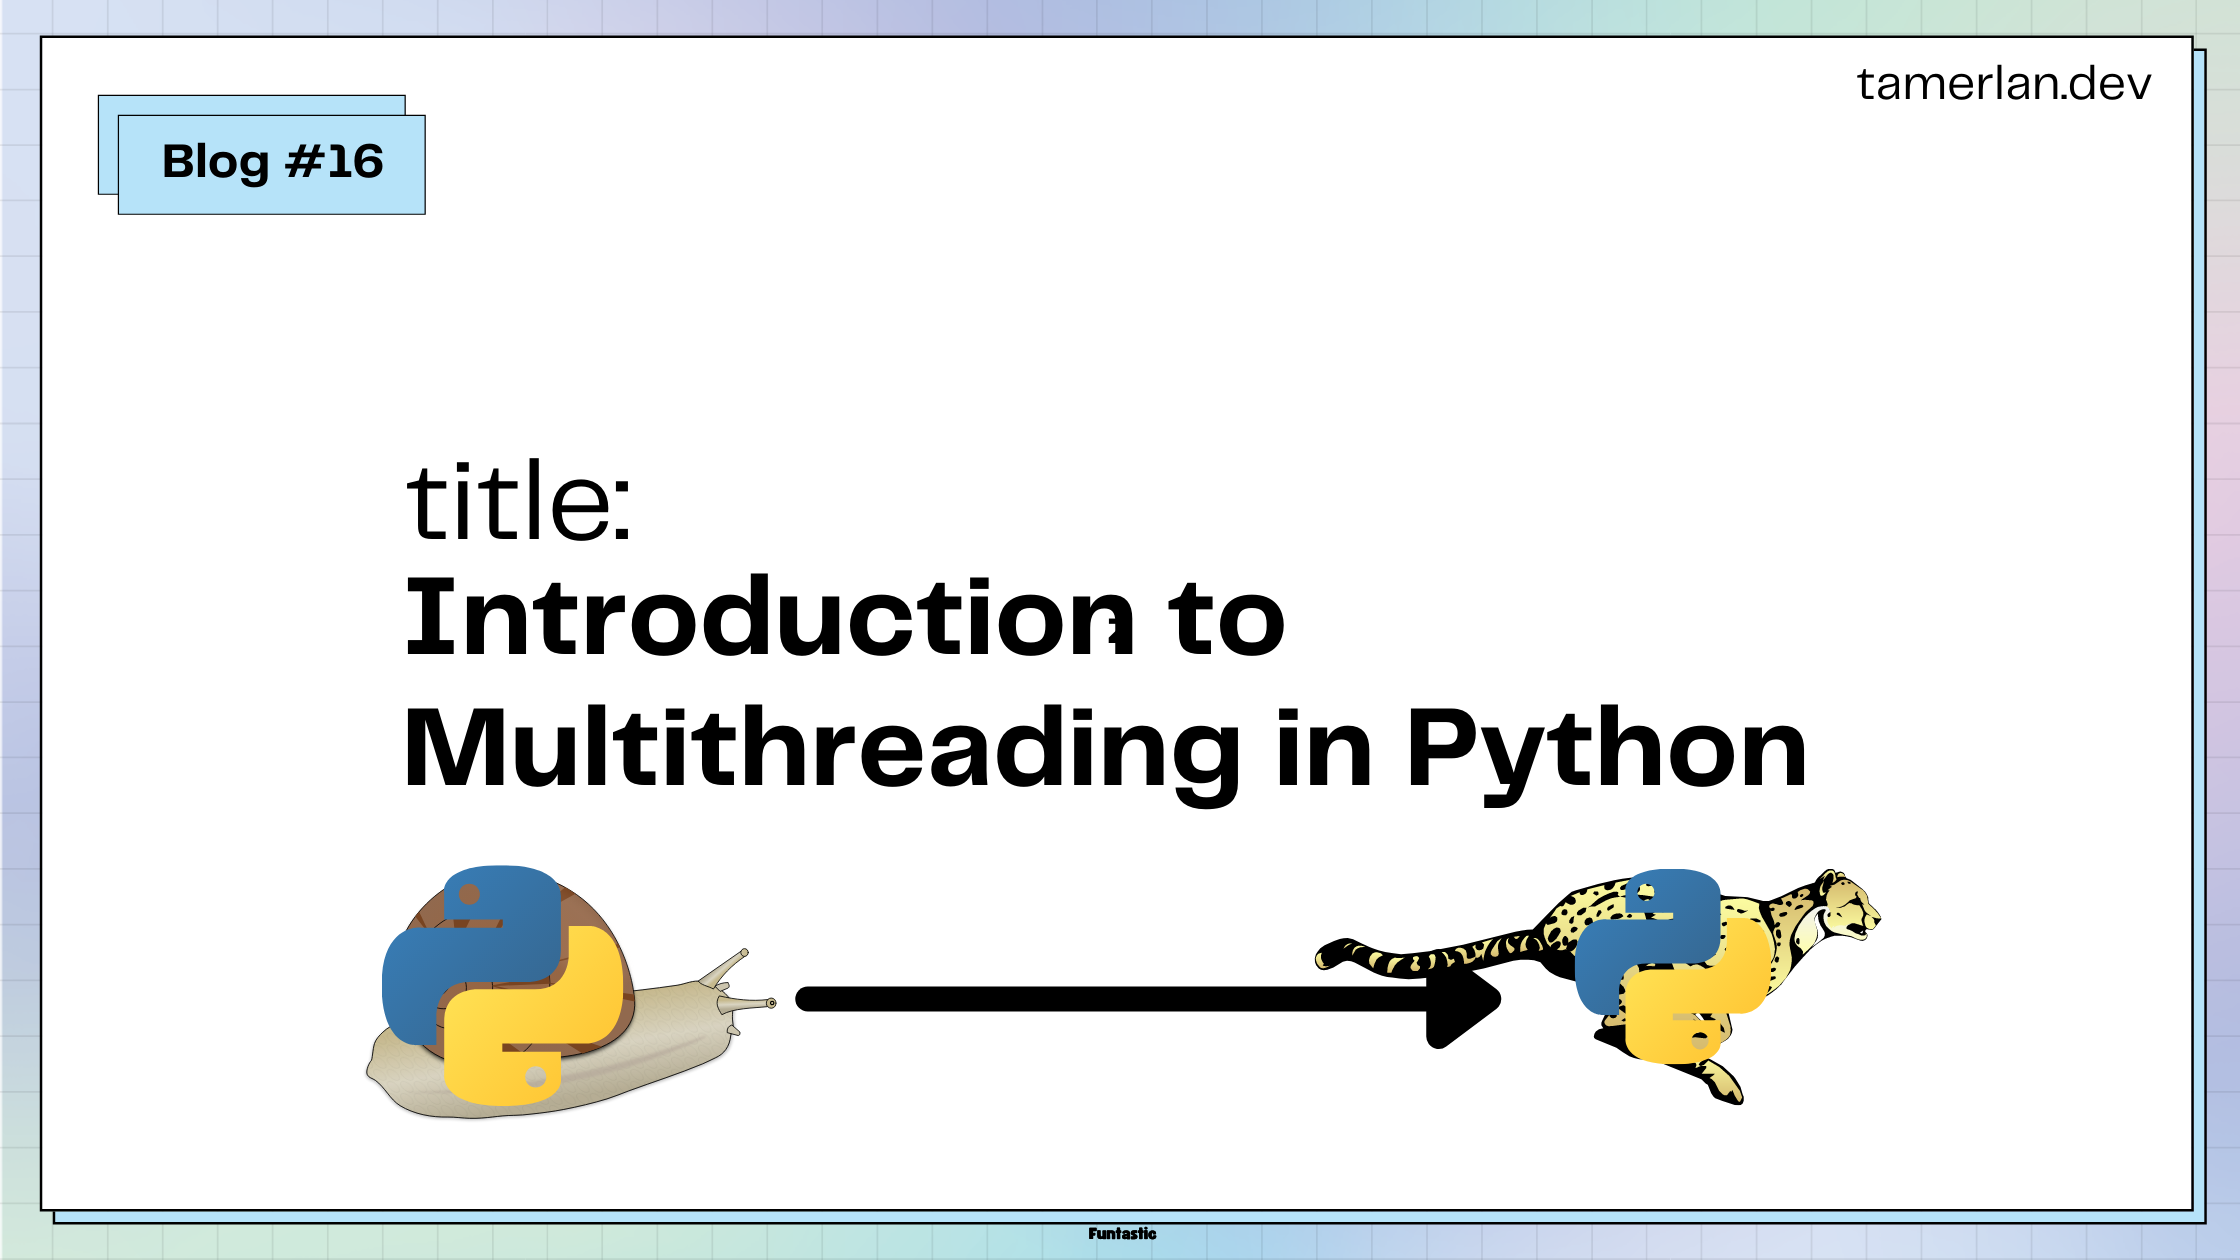 Introduction to Multithreading in Python